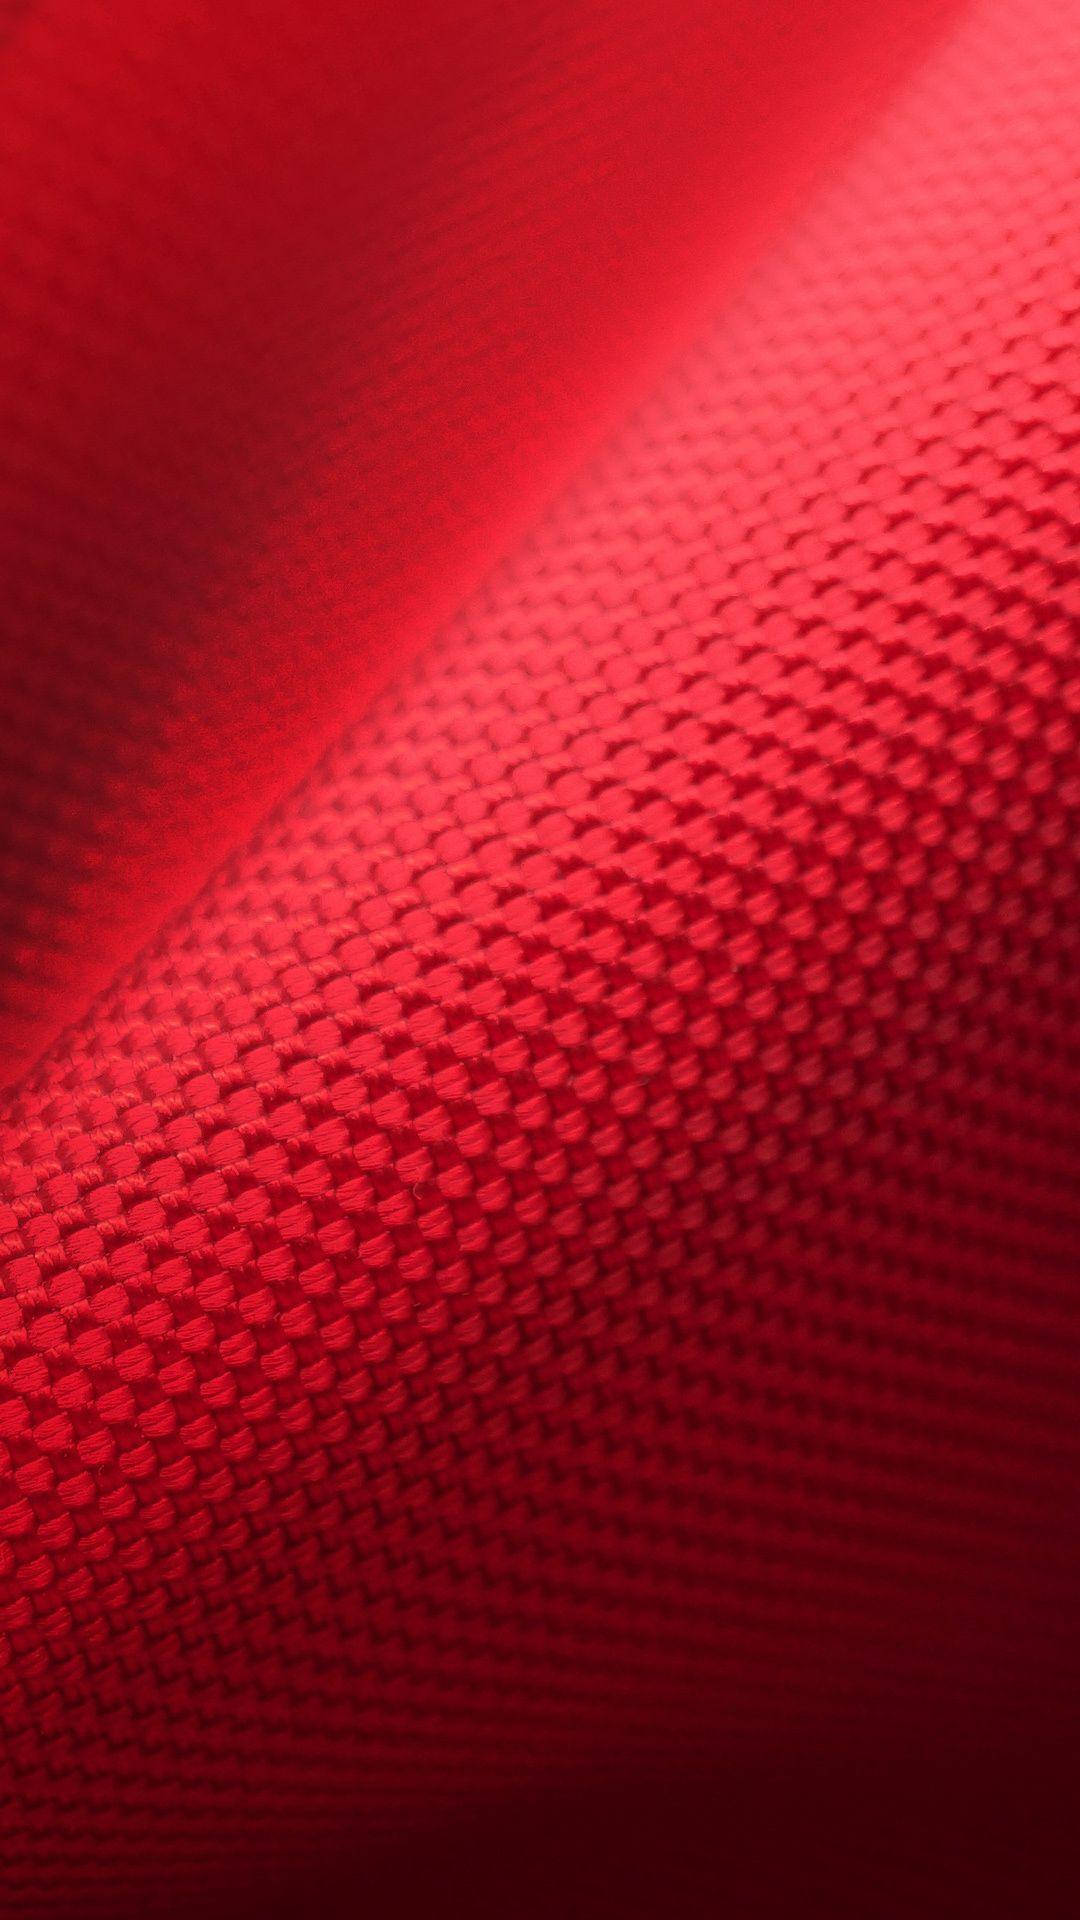 Woven Fabric Red Iphone Background